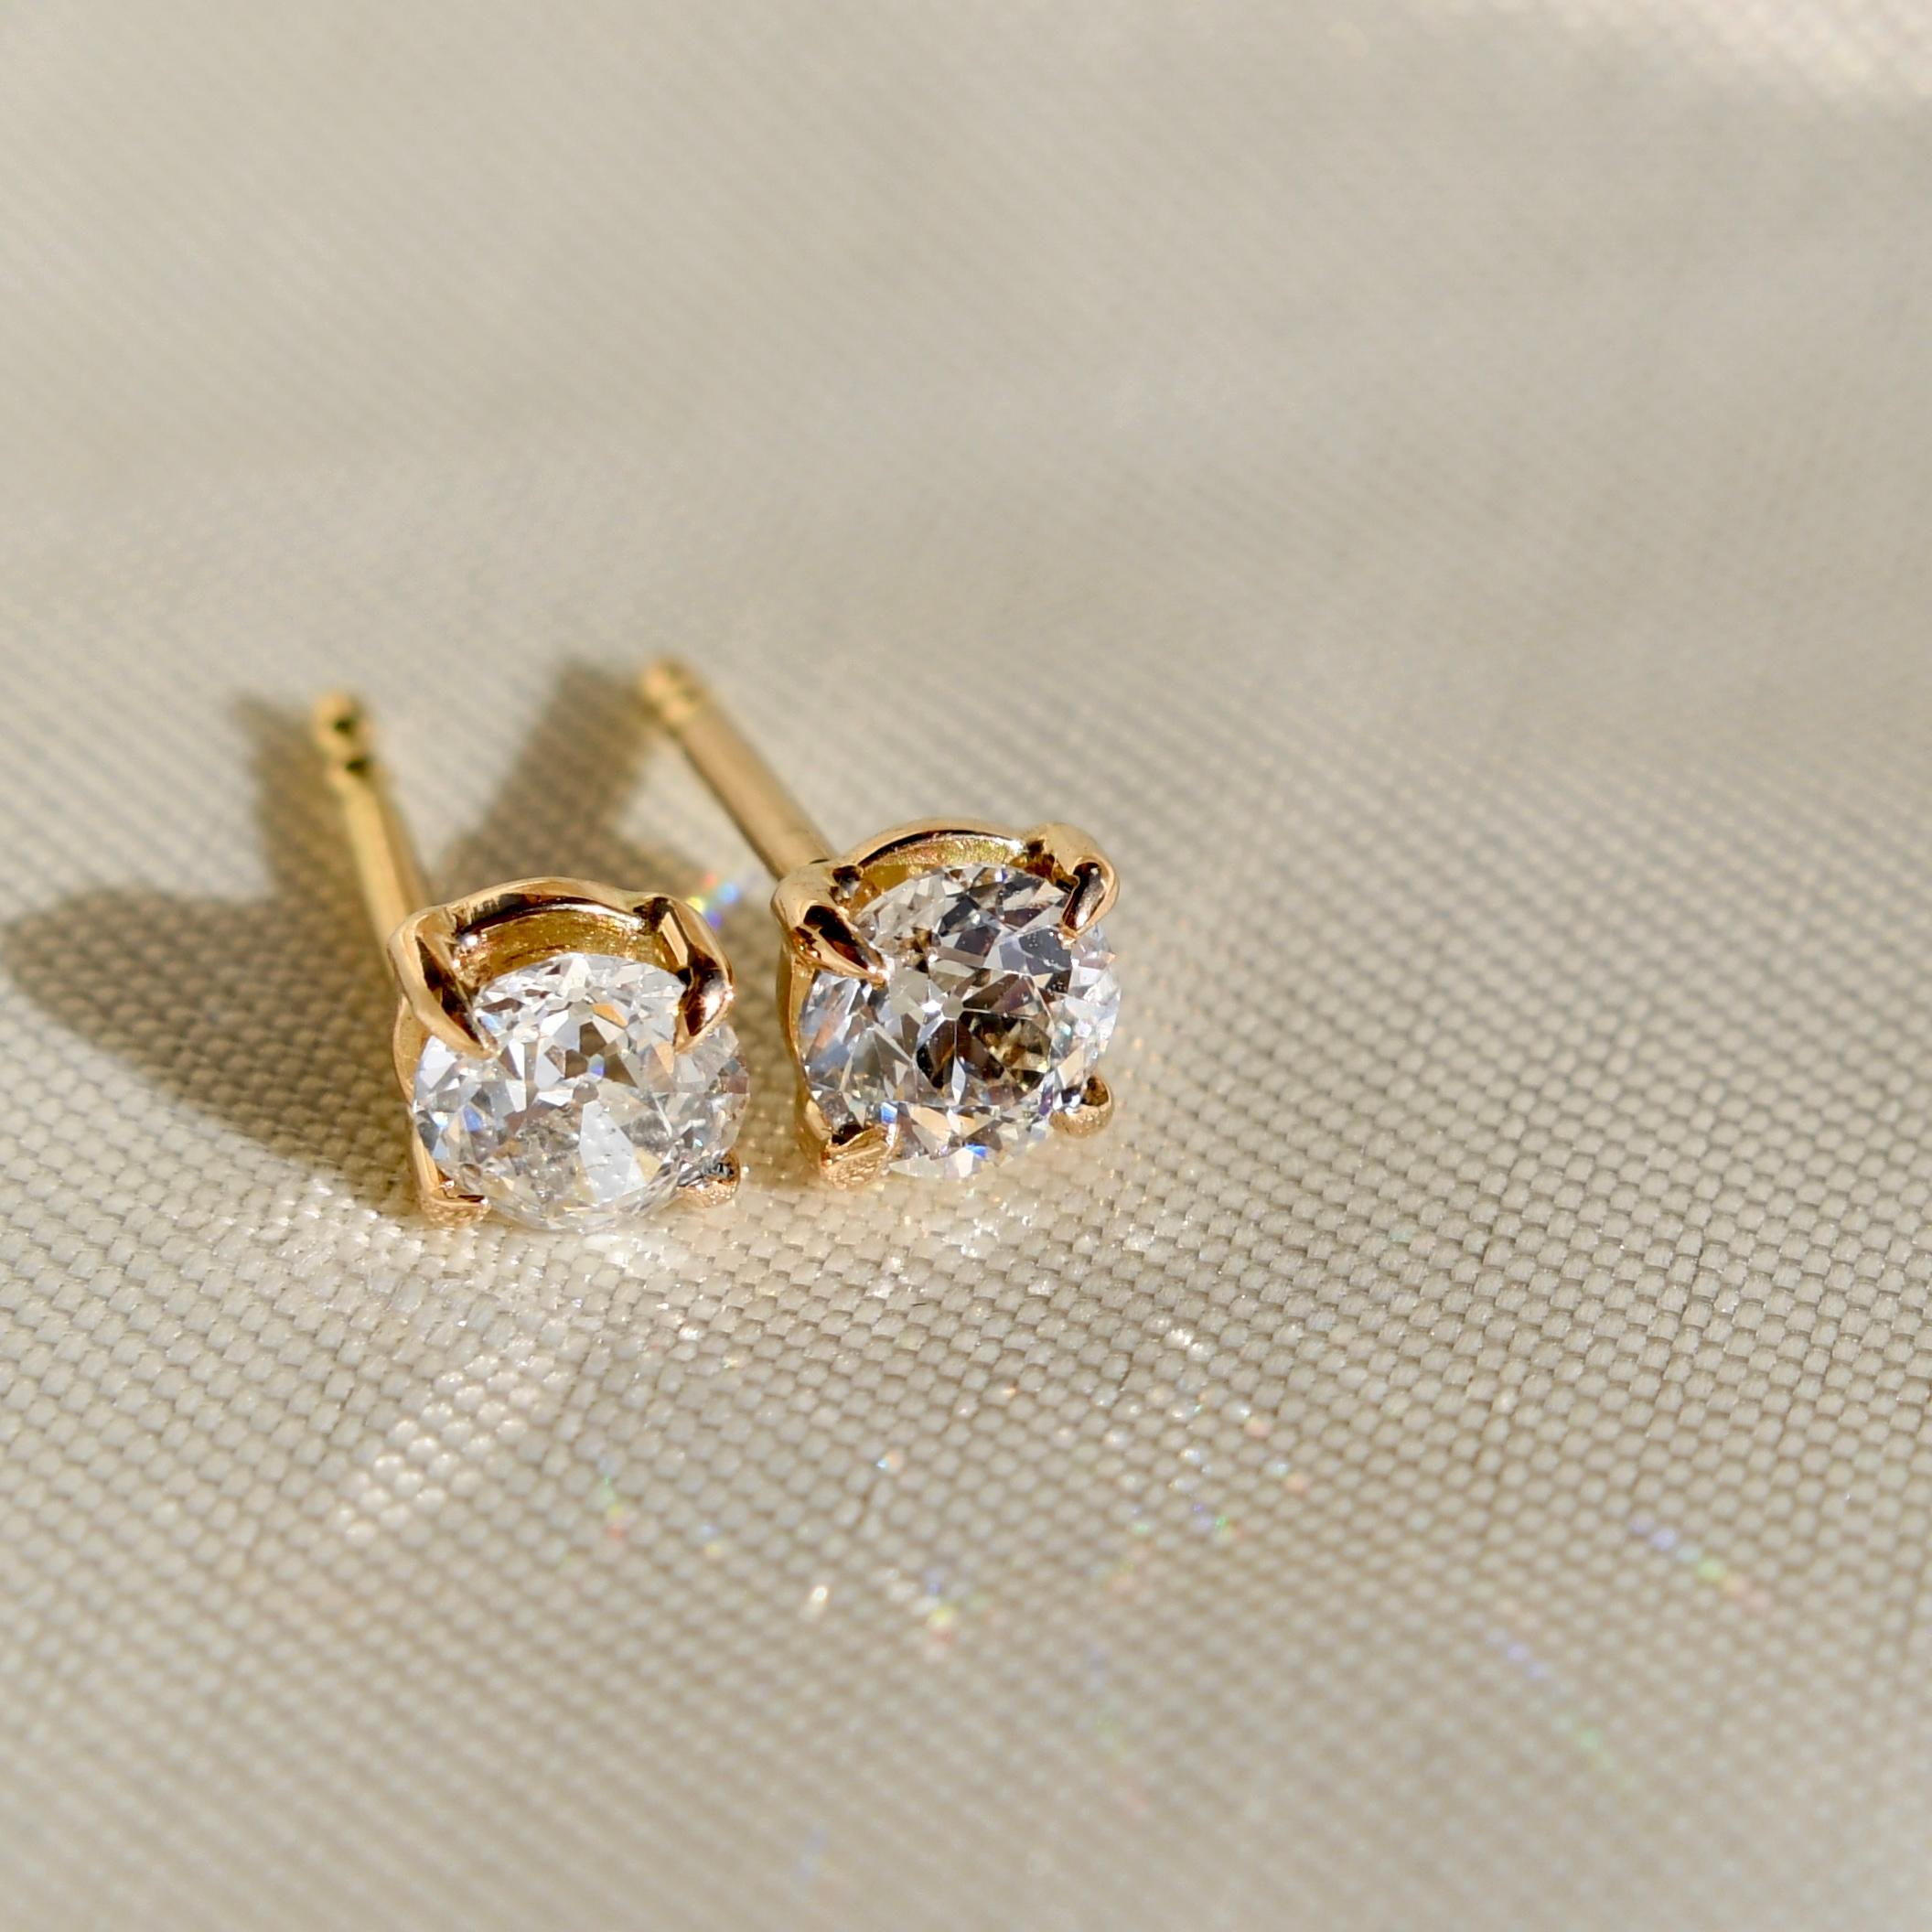 A pair of newly made studs featuring antique diamonds.

Two GIA certificates for the diamonds are included. 

- One old mine cut diamond, 4.32 x 4.67 x 3.04 mm/ 0.42 ct (GIA J/ SI2) 
- One old mine cut diamond, 4.32 x 4.69 x 2.75 mm/ 0.38 ct (GIA I/